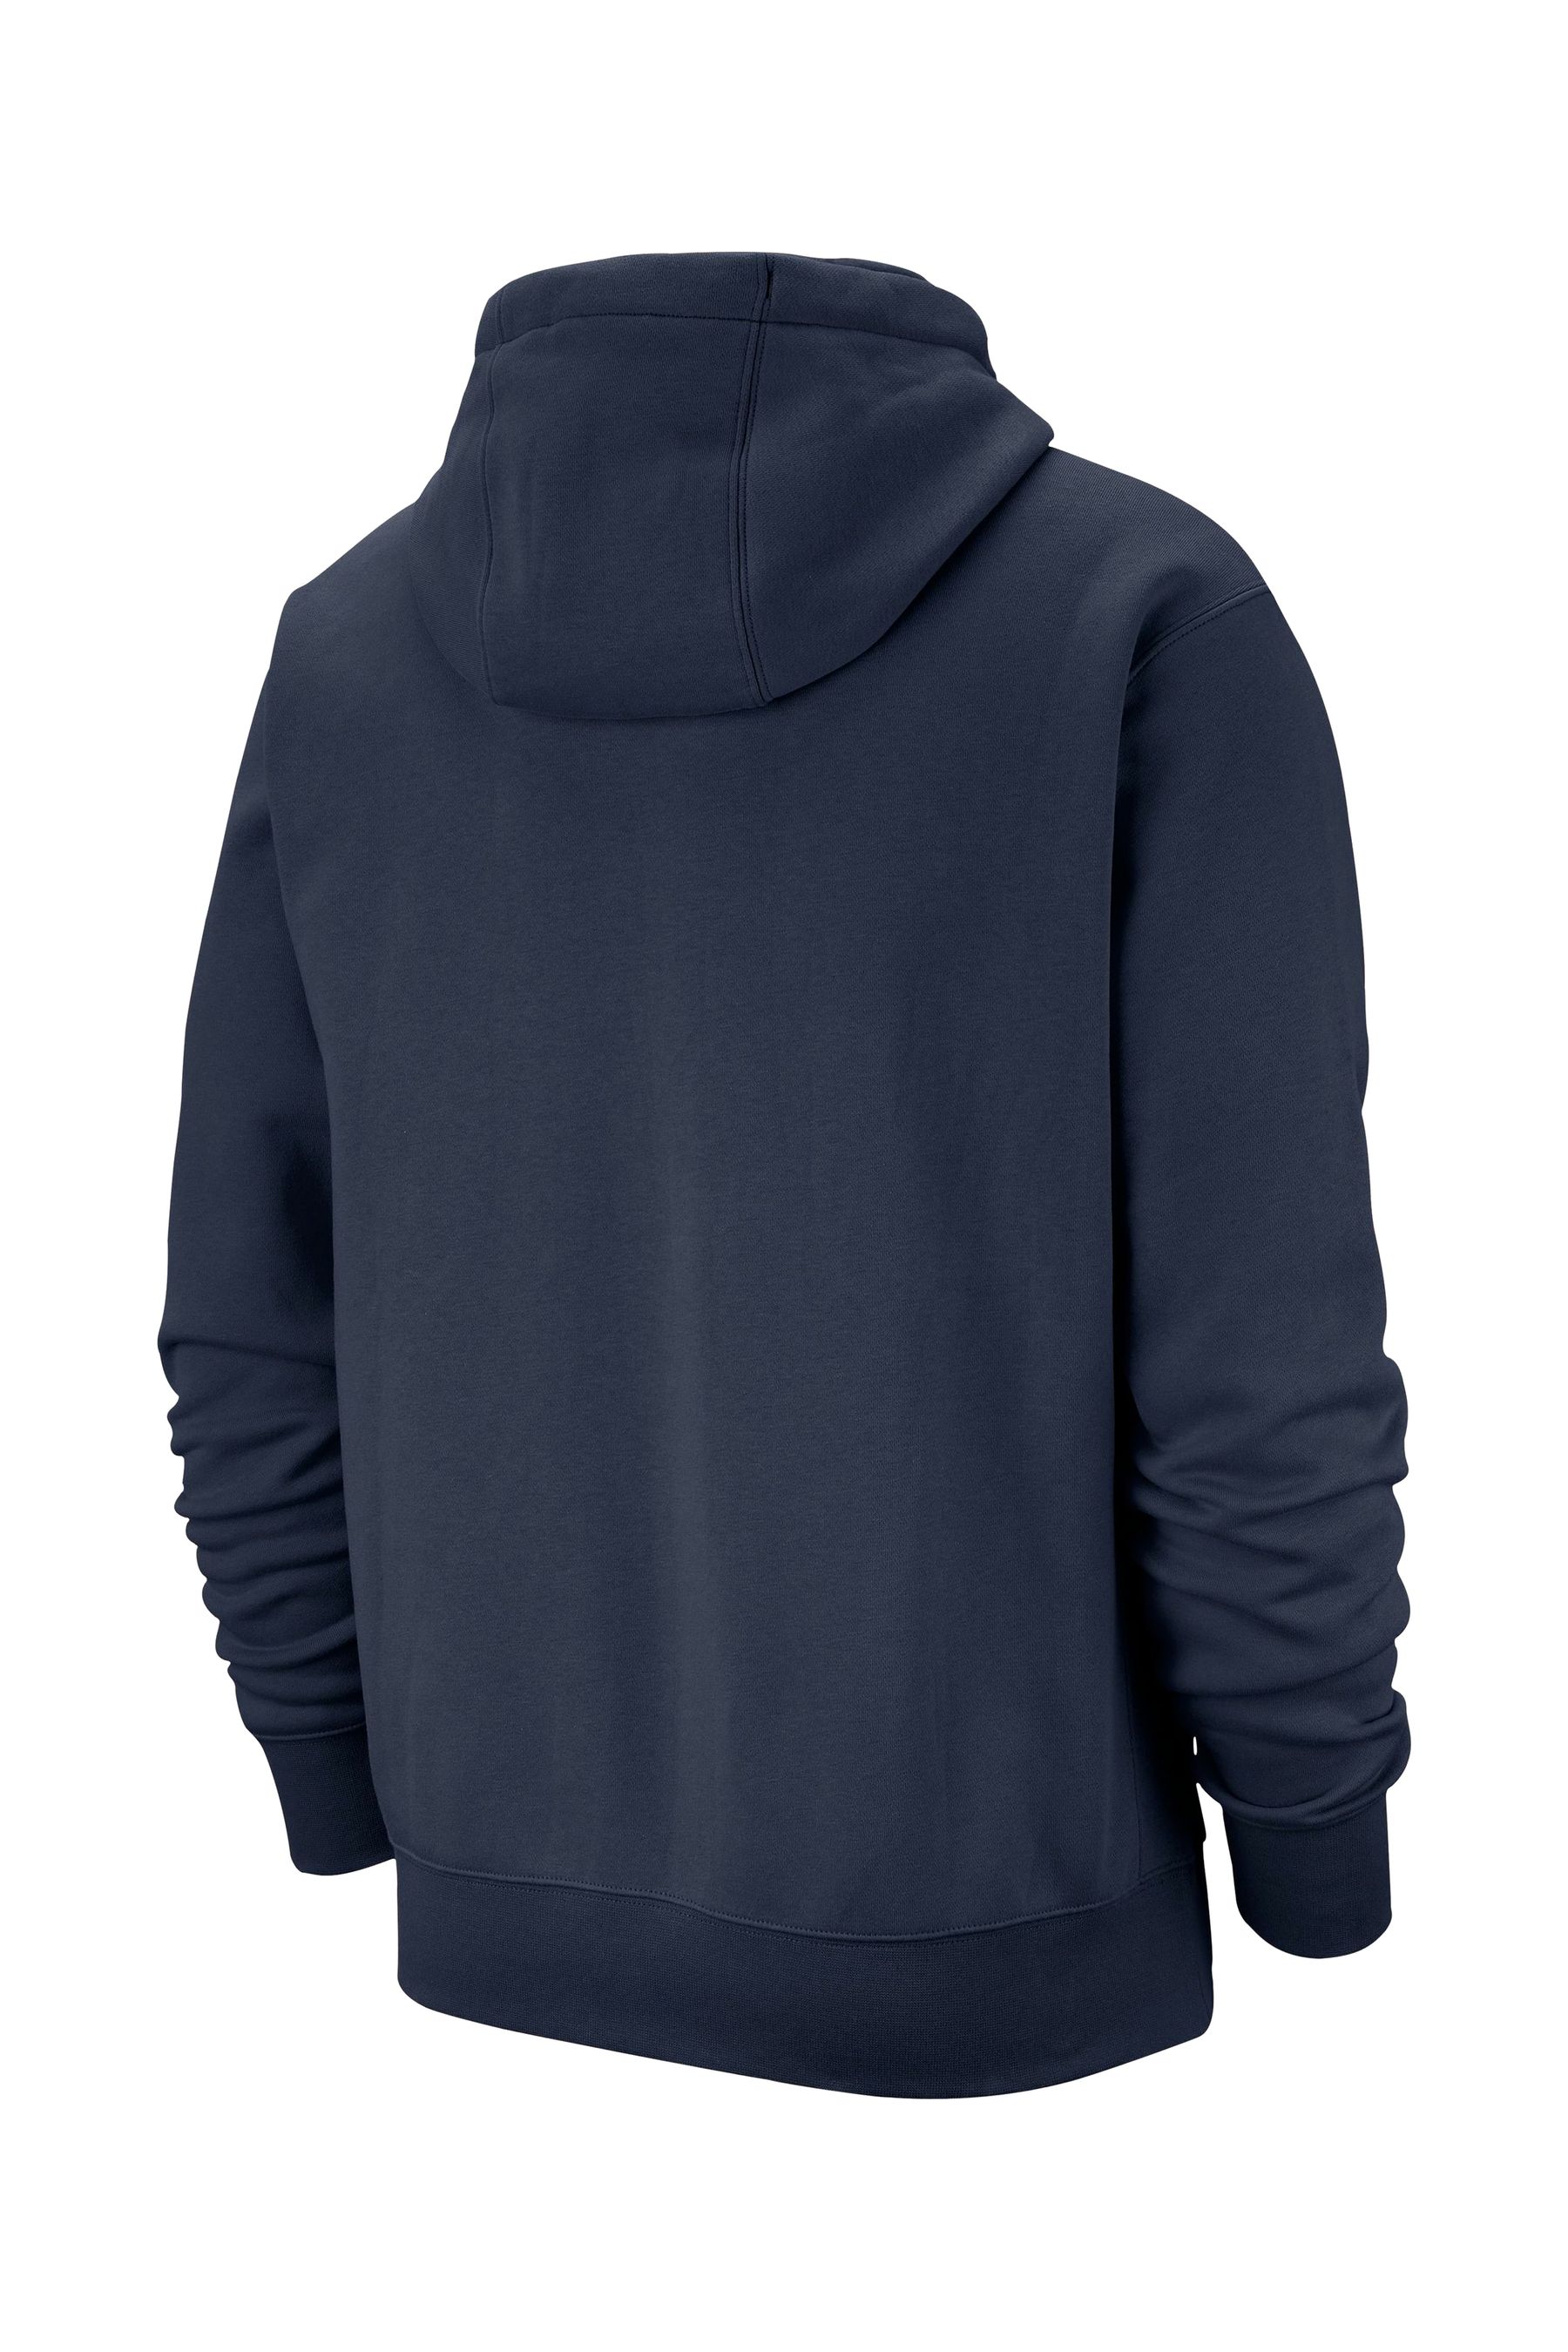 Buy Nike Club Pullover Hoodie from the Next UK online shop